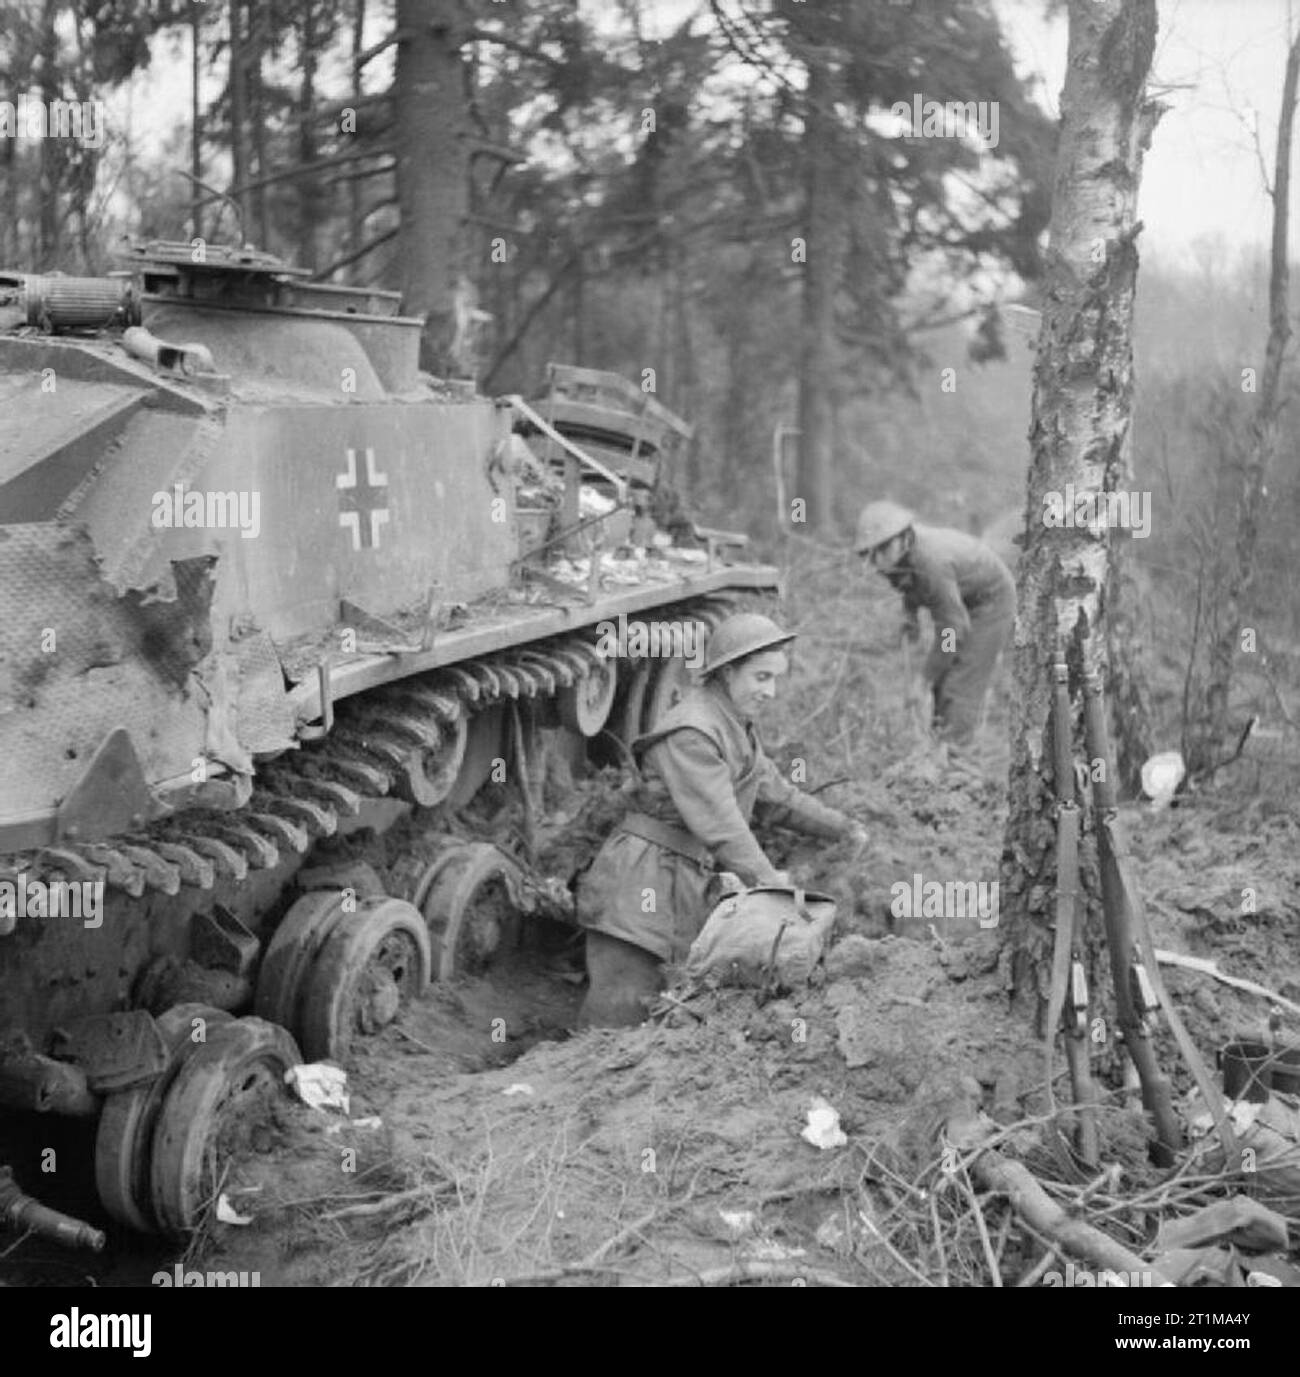 The British Army in North-west Europe 1944-45 Men of the 4th Royal Welch Regiment construct a dug-out by the side of a knocked-out German StuG III assault gun near Weeze, 3 March 1945. Stock Photo